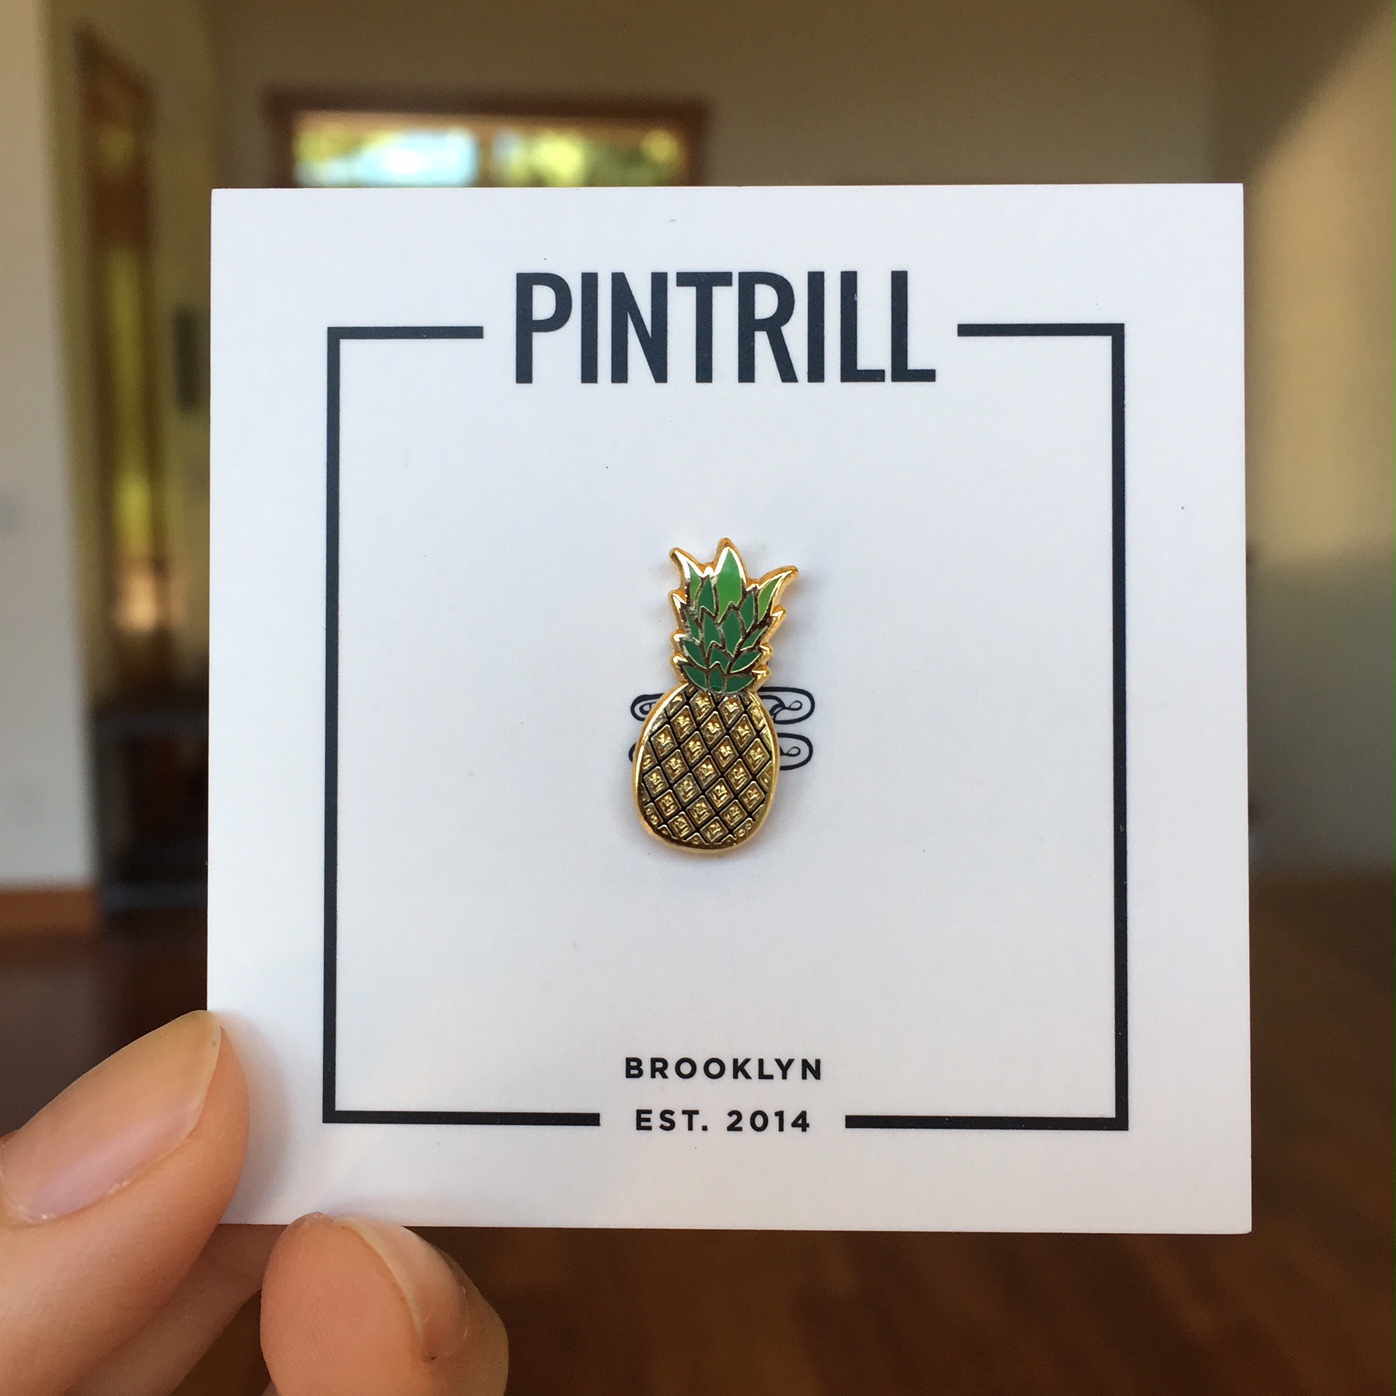 Pintrill Pineaplle pin